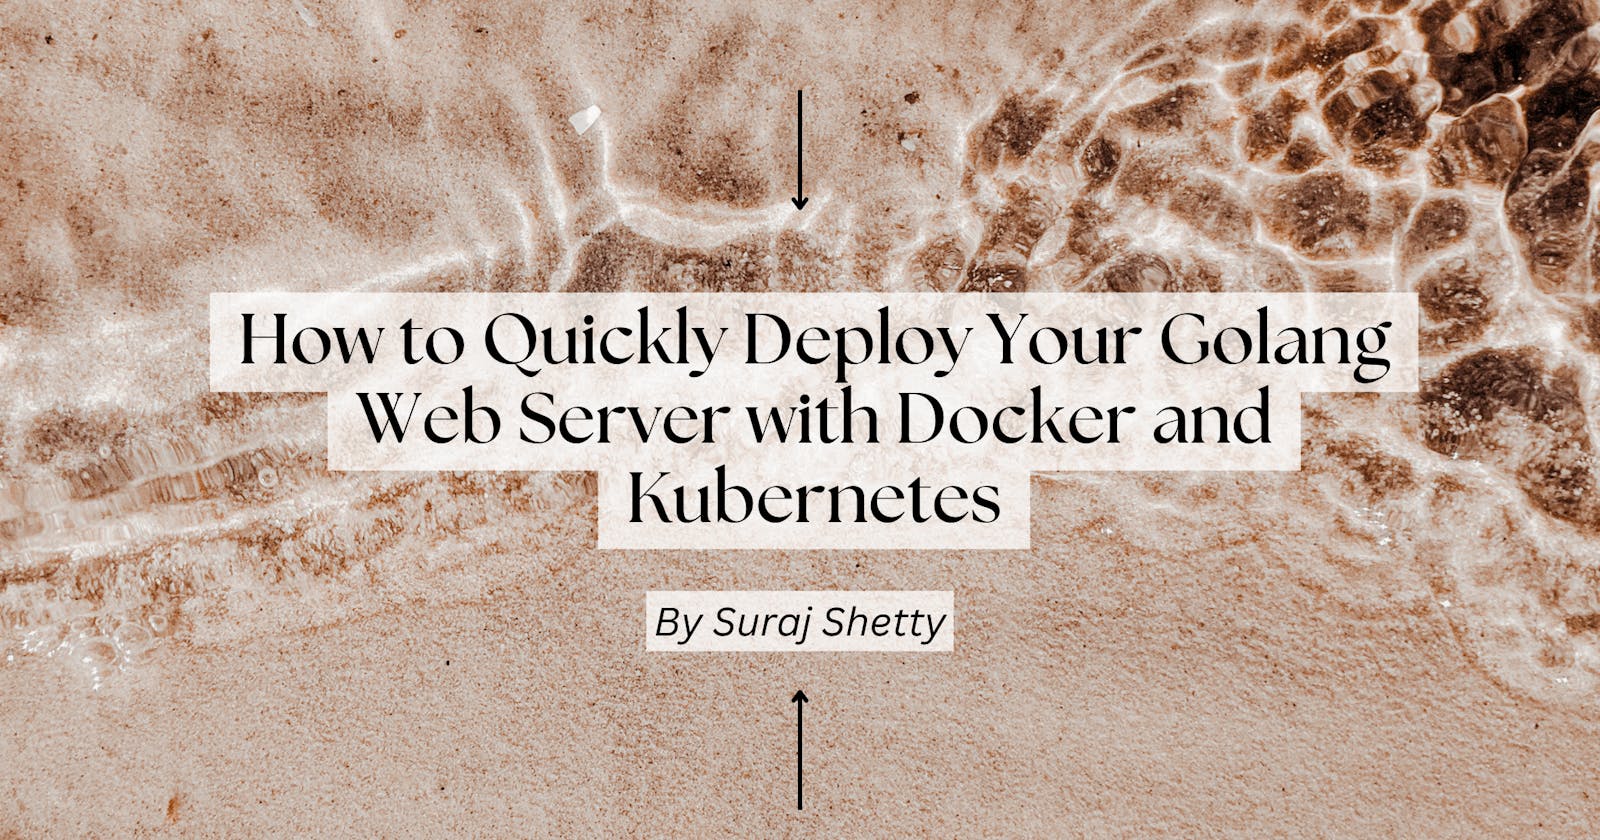 How to Quickly Deploy Your Golang Web Server with Docker and Kubernetes